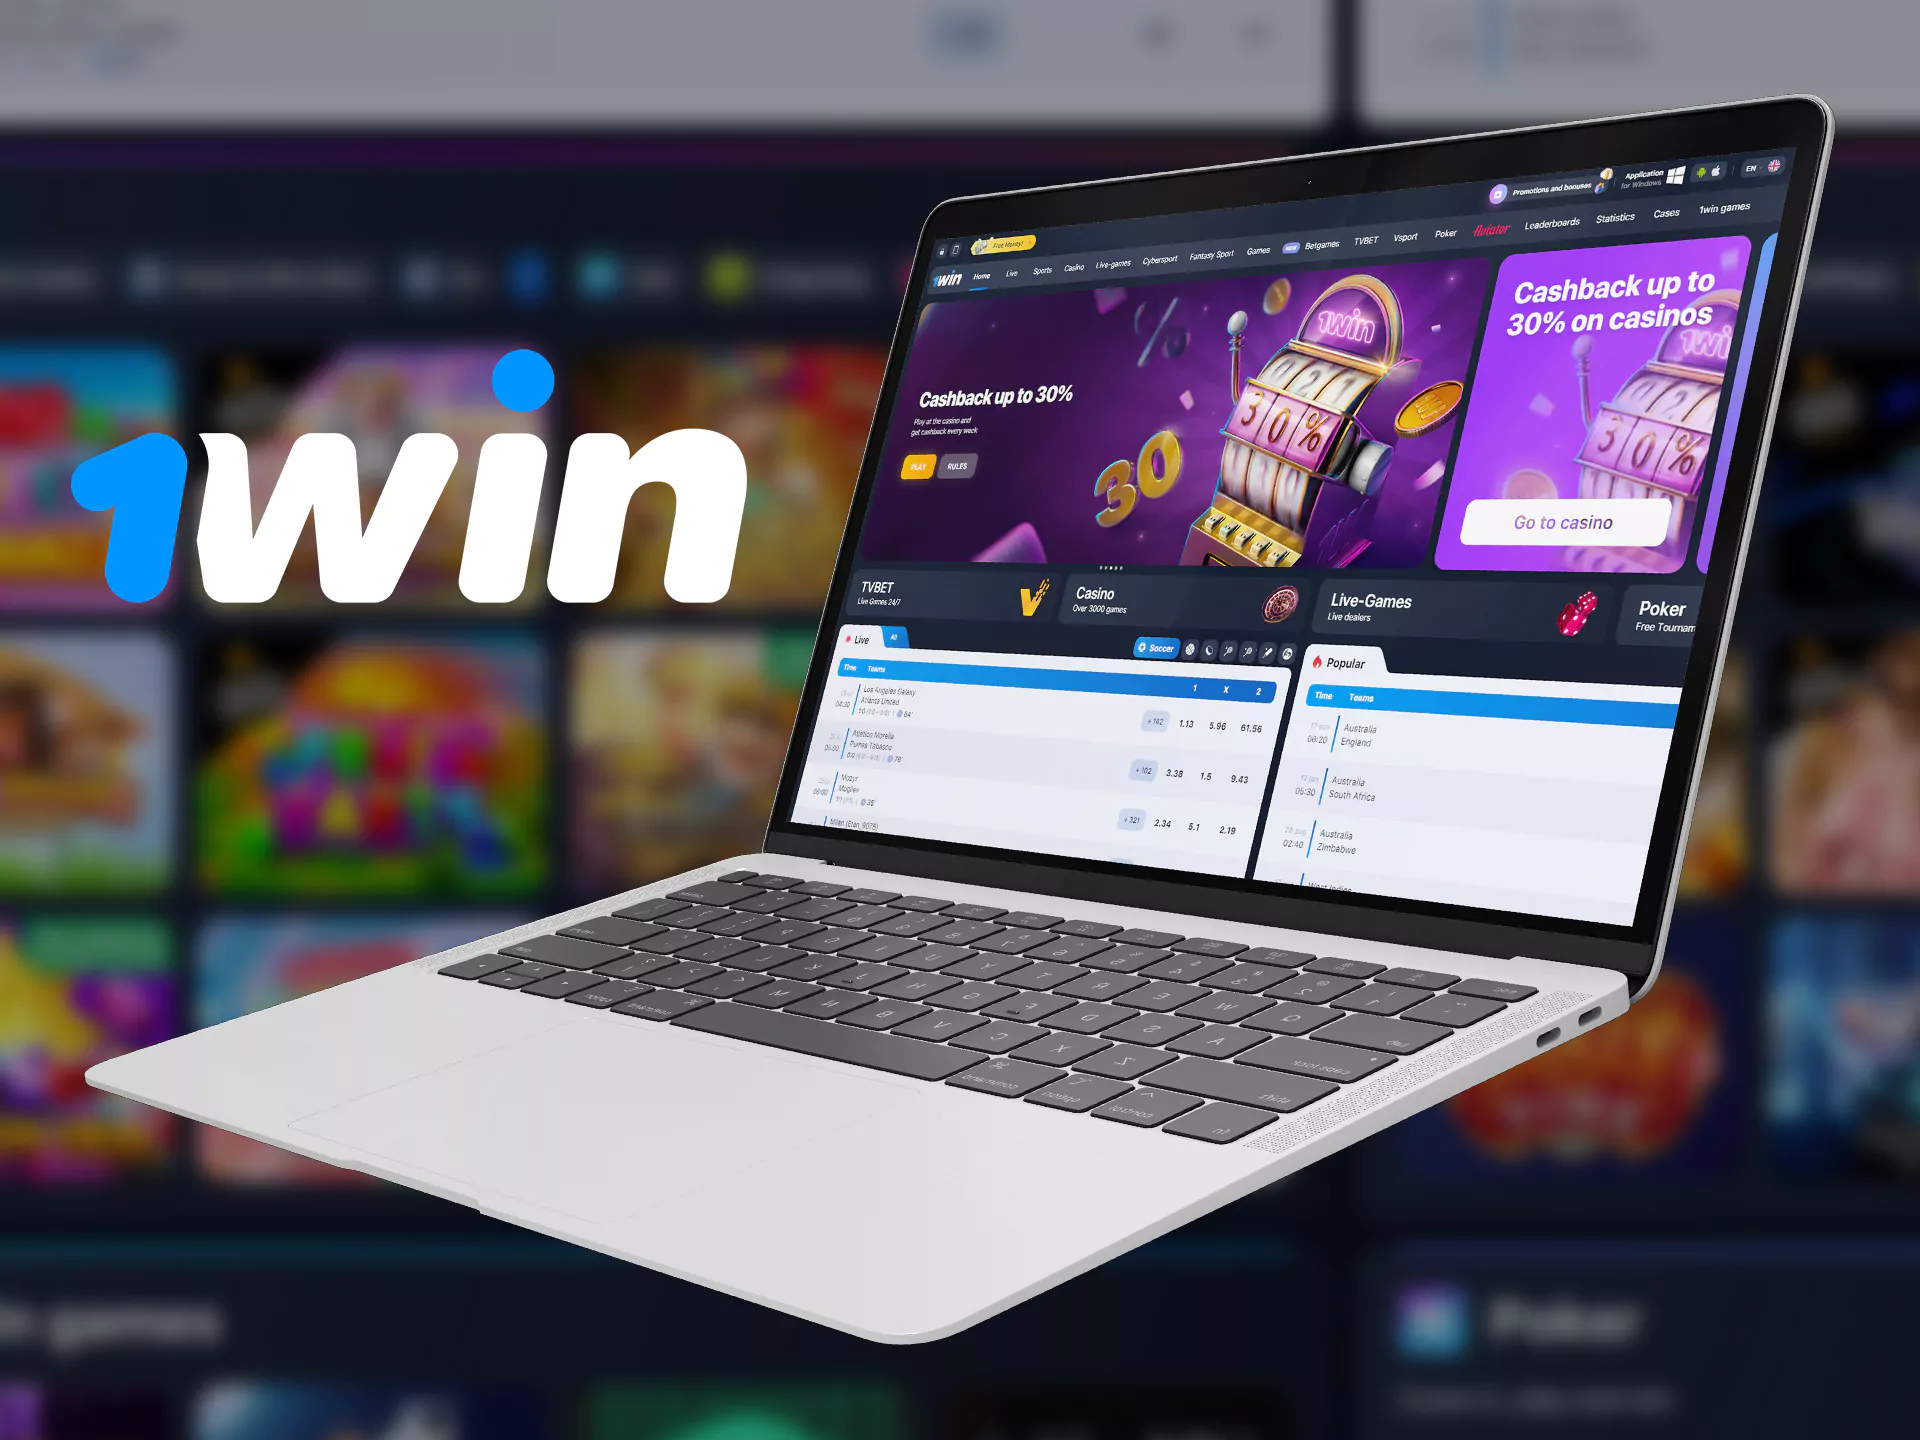 You can use the 1win website with any compatible device.